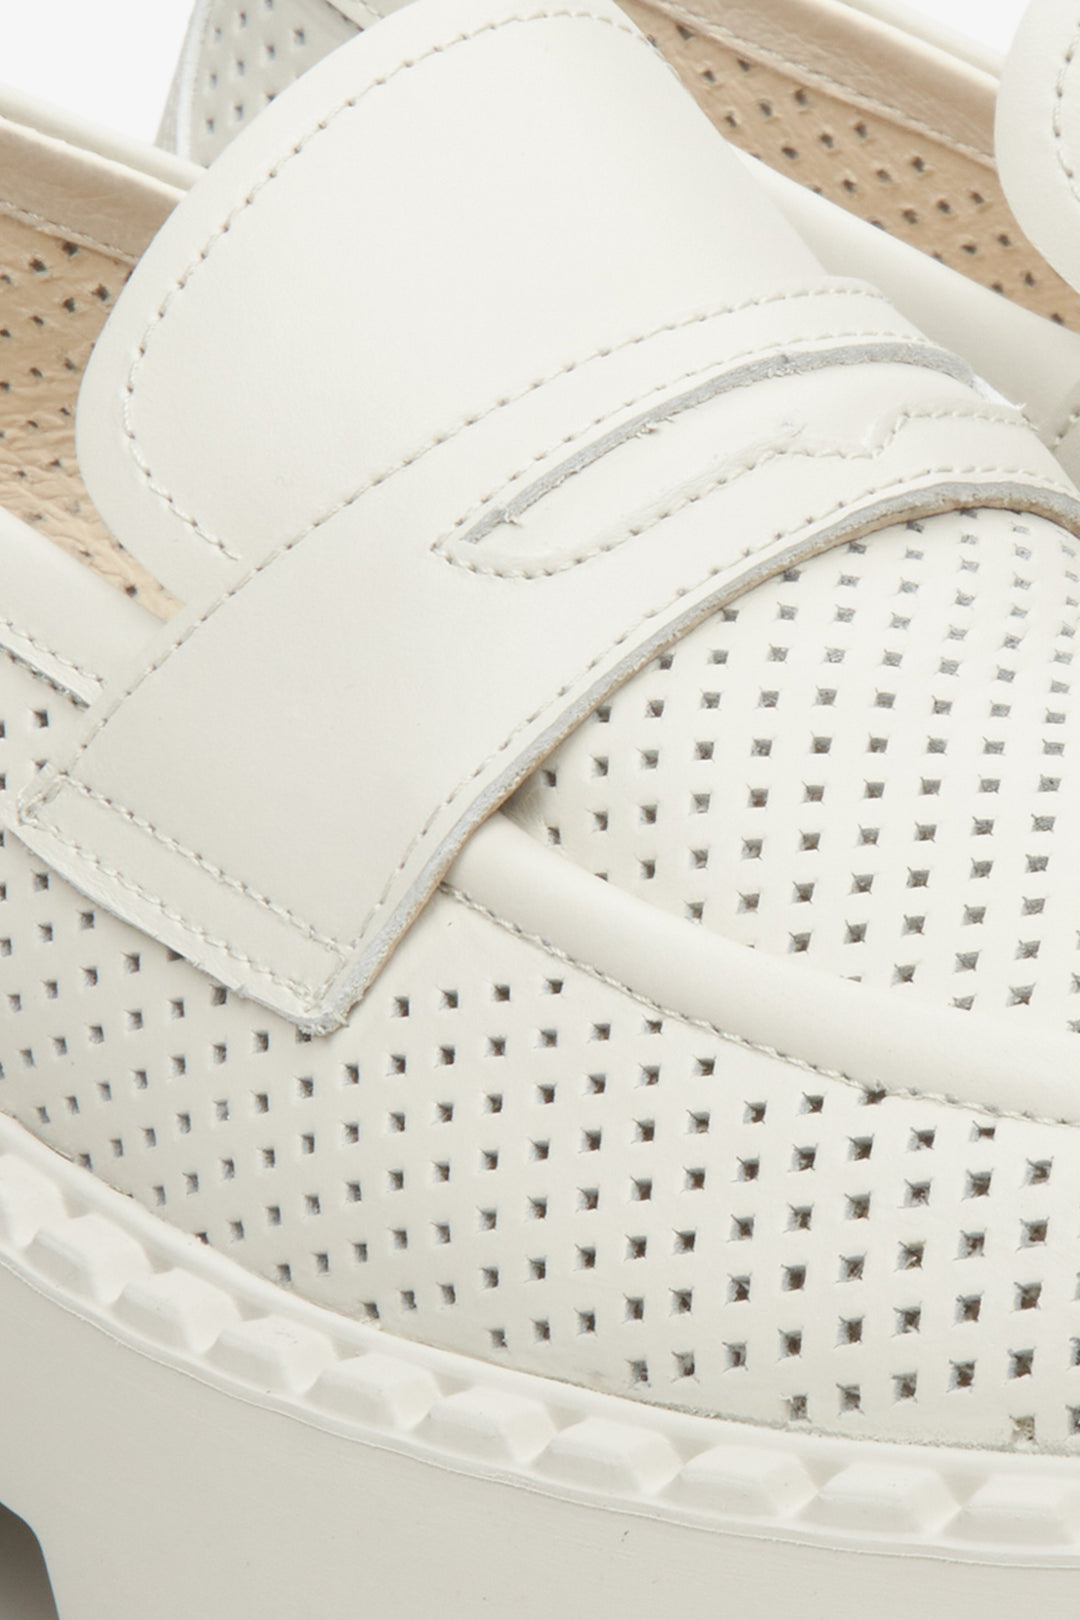 Women's leather loafers for summer in light beige color, brand Estro - close-up on the stitching system and perforation.